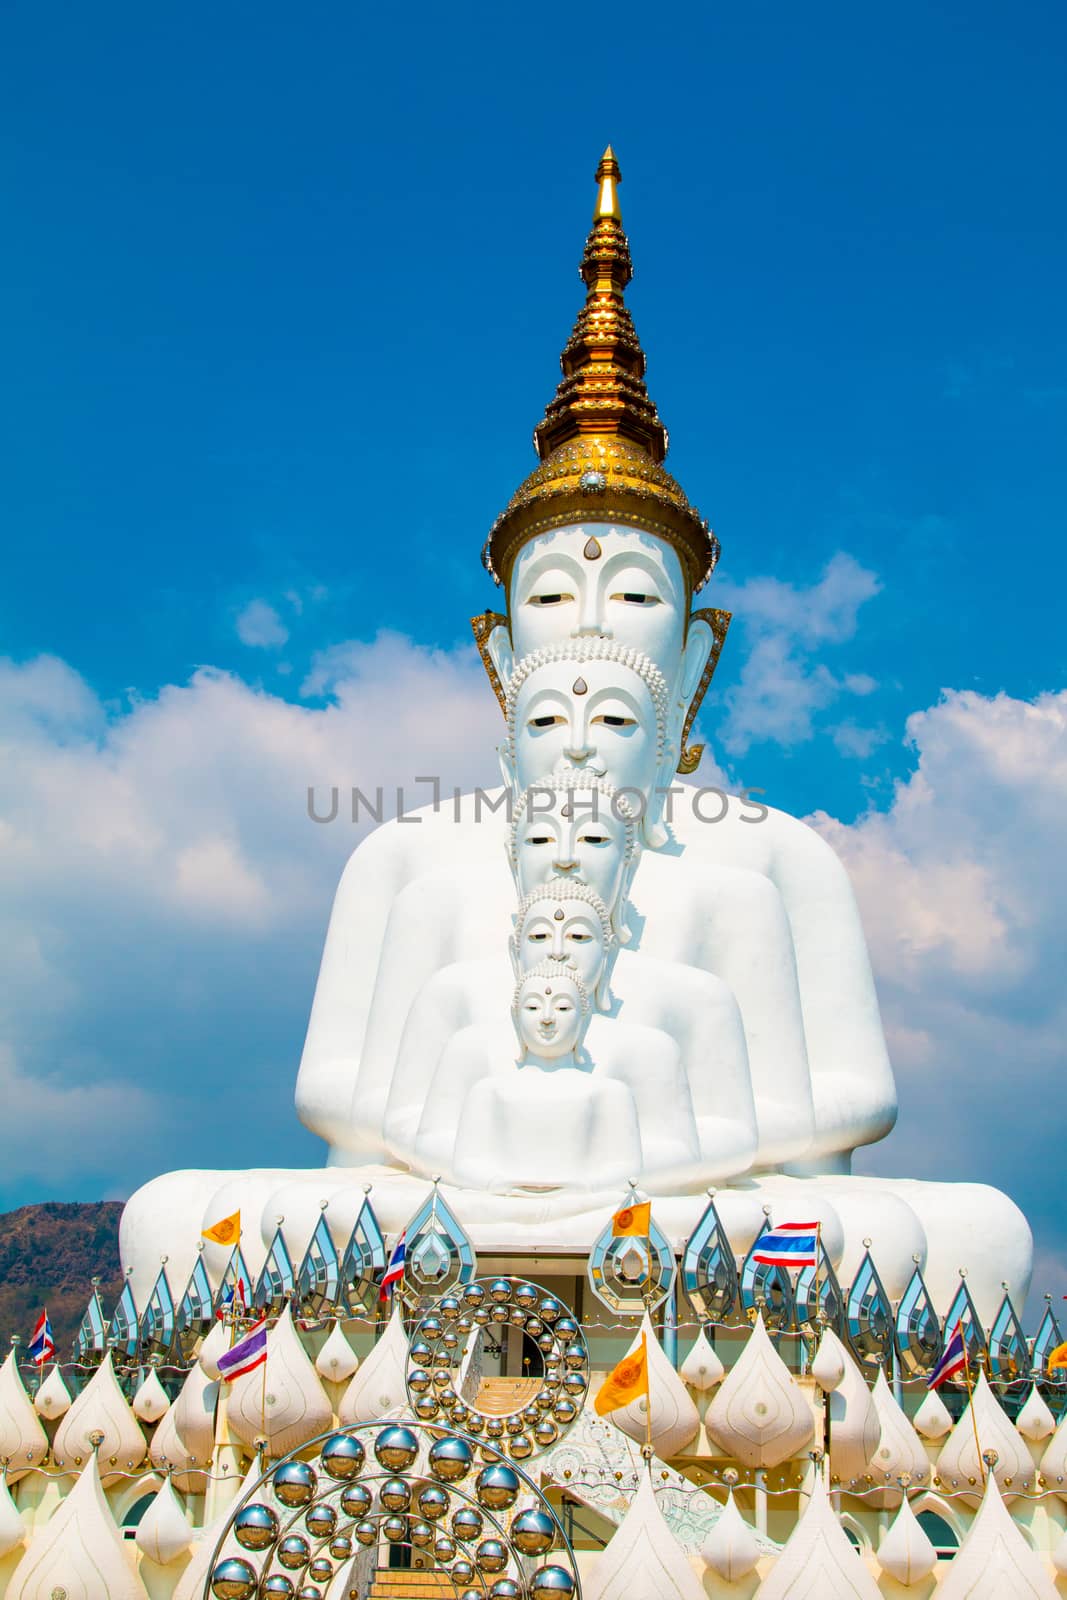 Phetchabun, Thailand - February 23.2017: Buddha statues and colored foot path colorful glass stacked in Wat Pha Kaew, Khao Kho, Phetchabun on February 23.2017 at Thailand.There. A famous Buddhist temple.